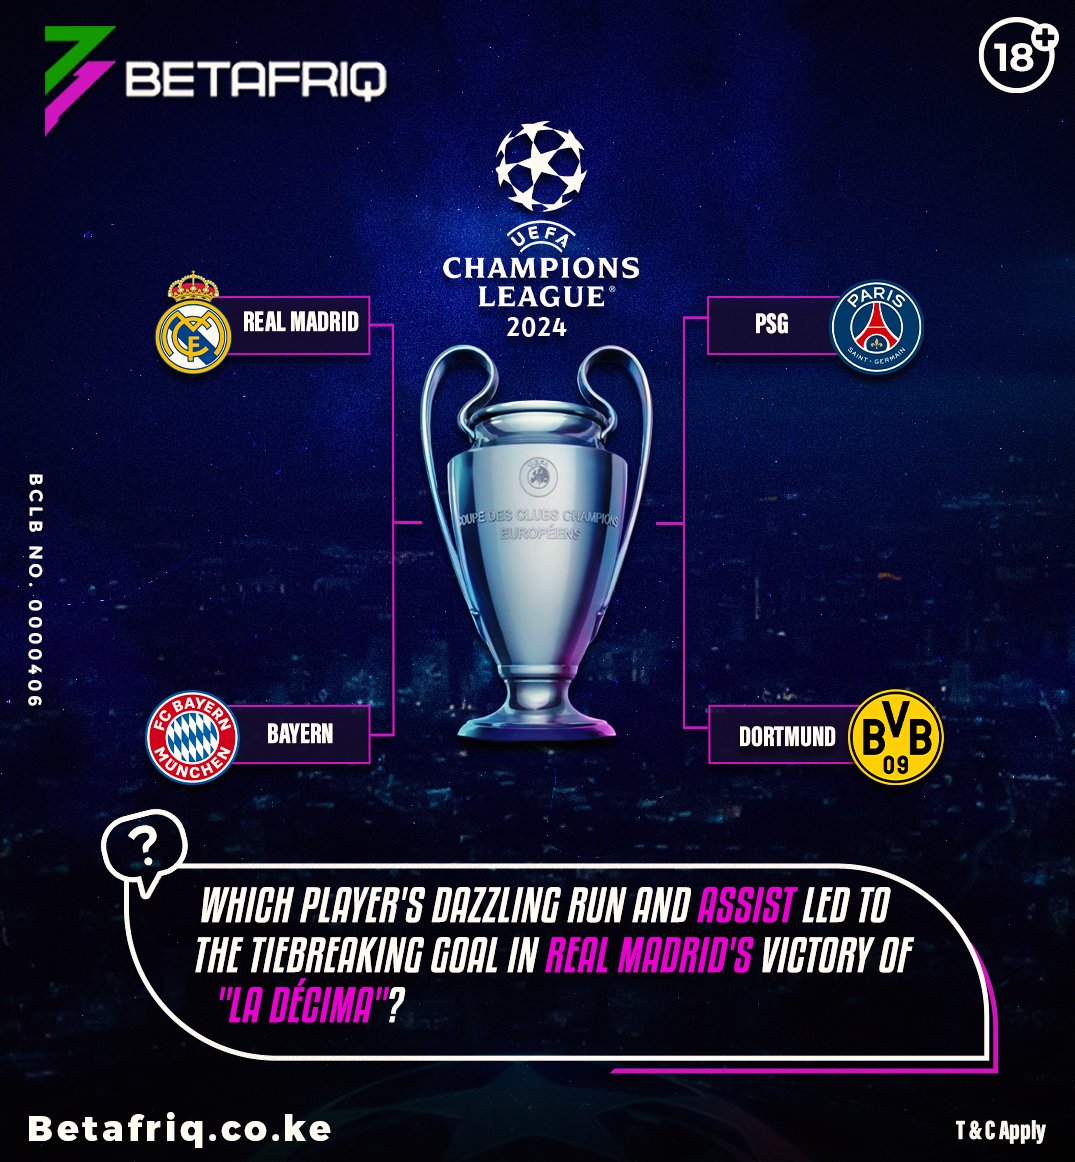 🚨 Can #RealMadrid add another star to their kit this season? ⚪🏆 #UCL #FridayTrivia ➡️ FREEBET up for grabs! 🤑 🔞| 𝐓&𝐂 𝐀𝐩𝐩𝐥𝐲 [MUST INCLUDE YOUR PLAYER ID] #AnythingIsPossible